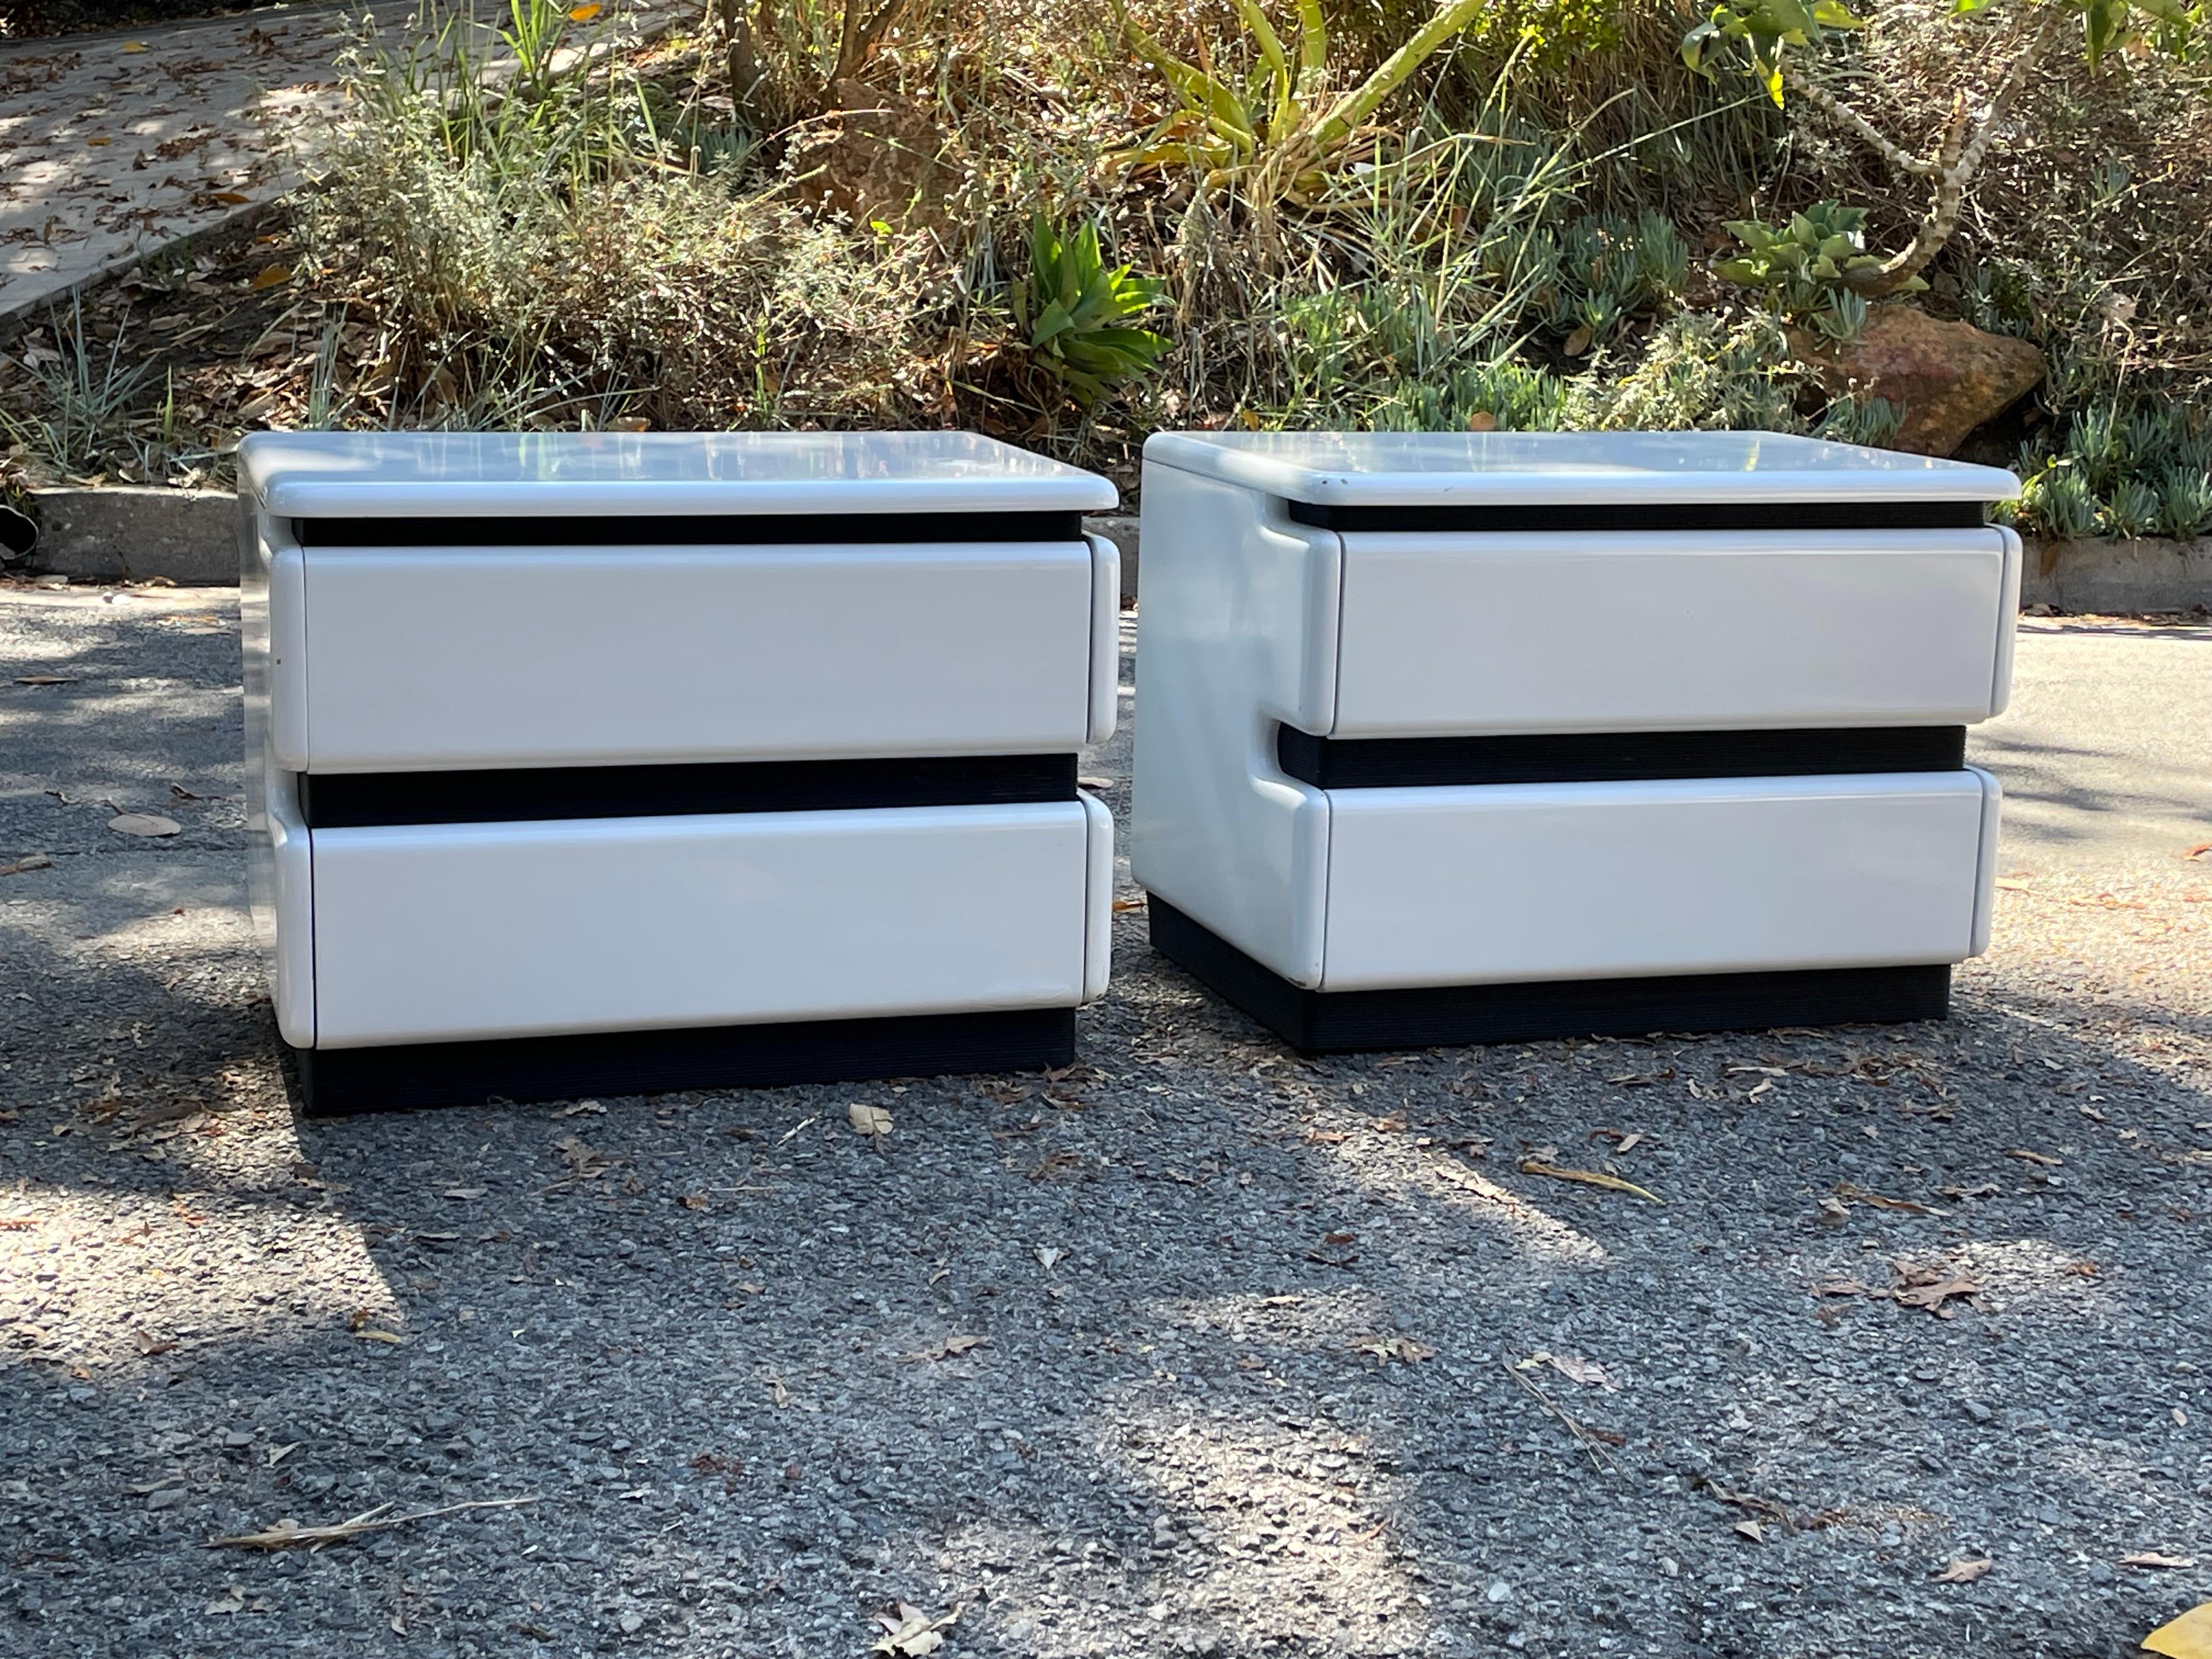 Vintage Post Modern two drawer white gloss lacquer nightstands, circa 1980 by Roger Rougier.

Features a timeless space age design with white lacquer, black rubber accents and two generous drawers with hidden pulls.

We're currently pairing these